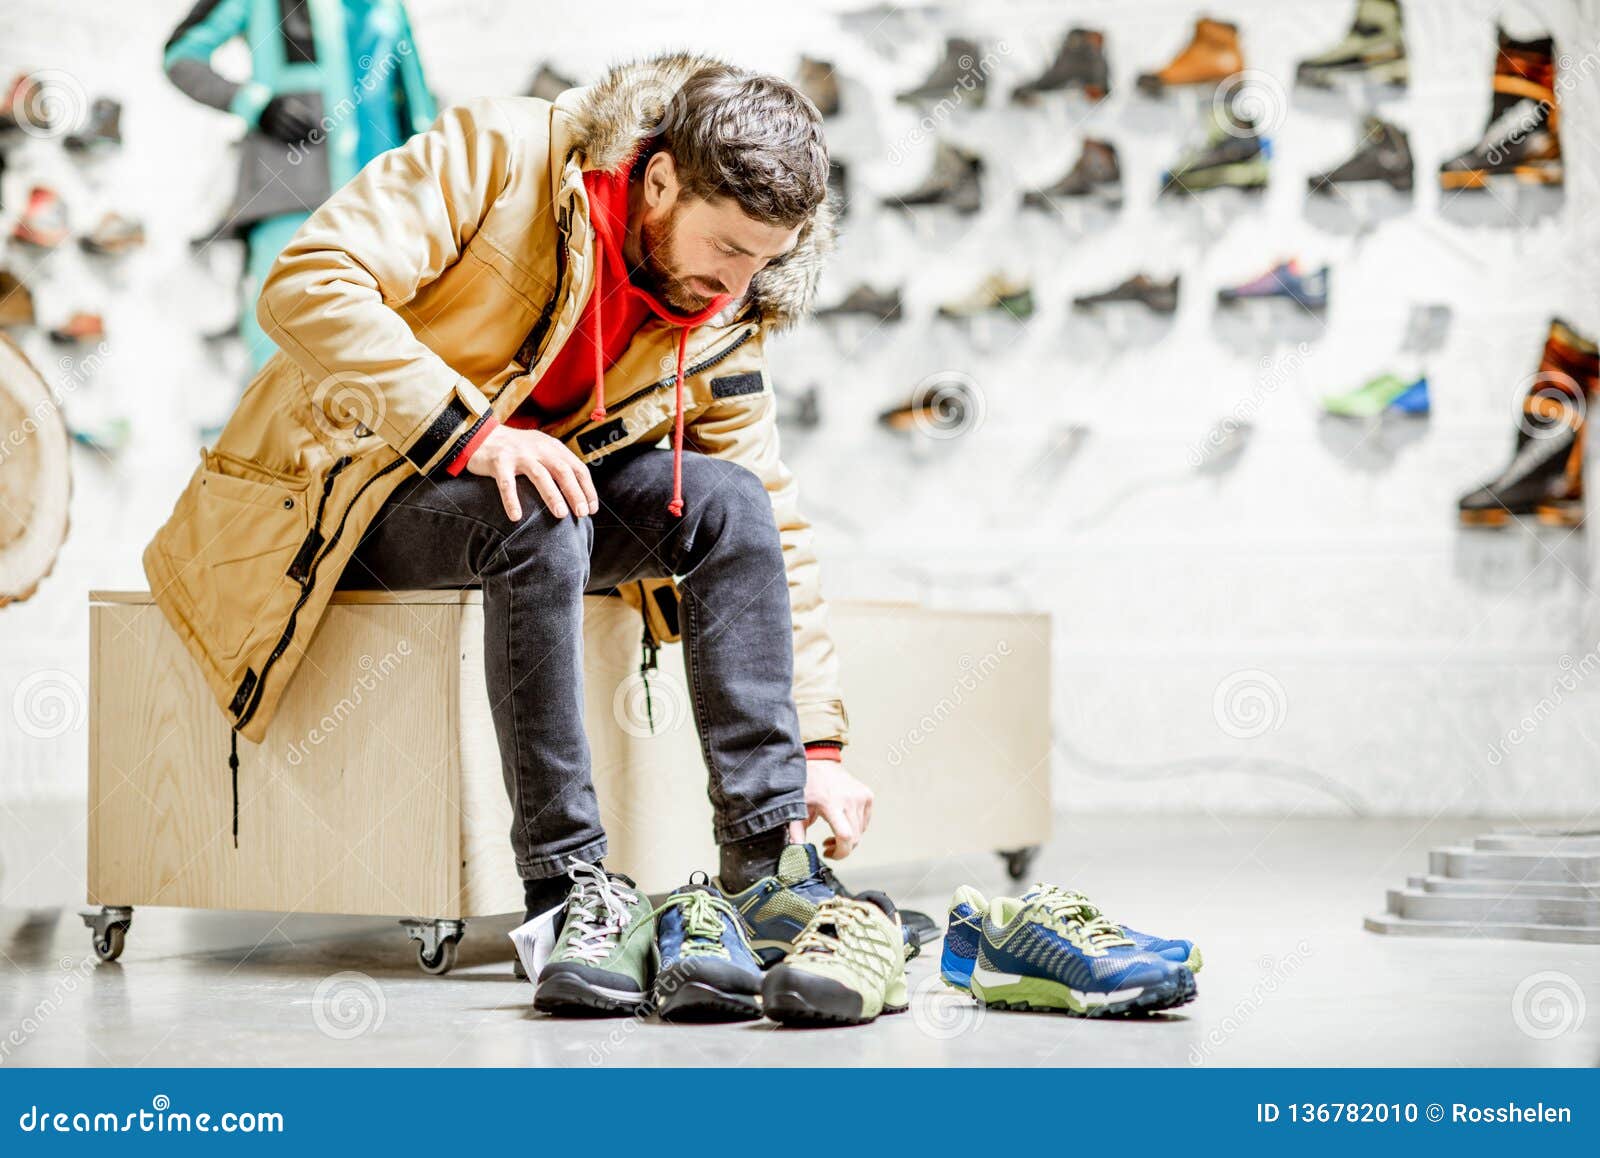 Man Trying Shoes for Hiking the Shop Photo - Image of athletic, 136782010